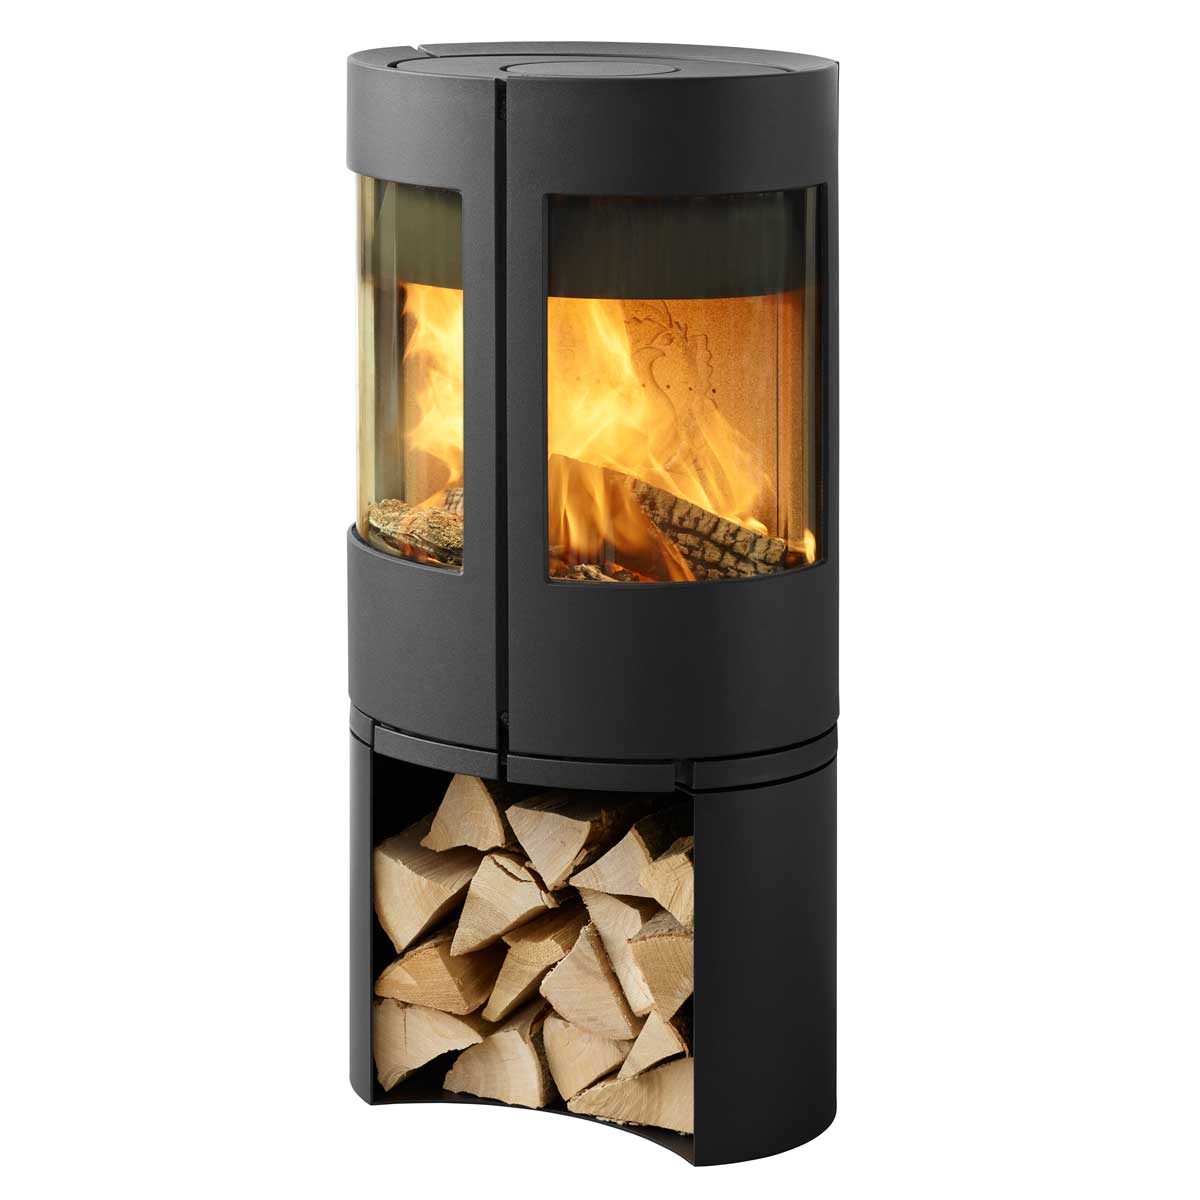 Morso 6643 freestanding wood fire with timber storage underneath